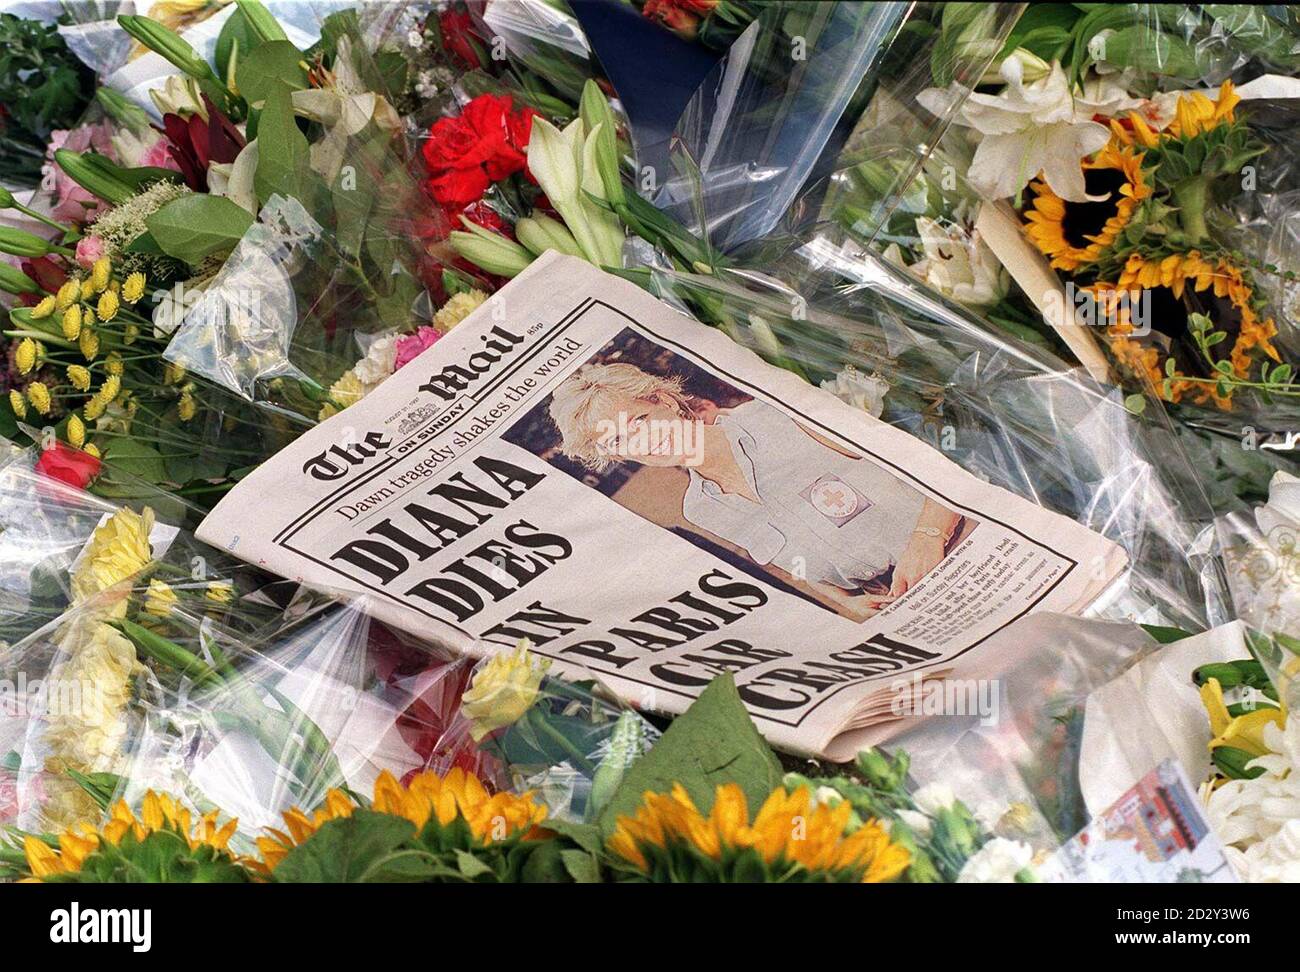 The tragic headline on the Mail on Sunday lies in amongst the hundreds of  bunches of flowers left outside the gates of Kensington Palace in London -  Diana, Princess of Wales' formal